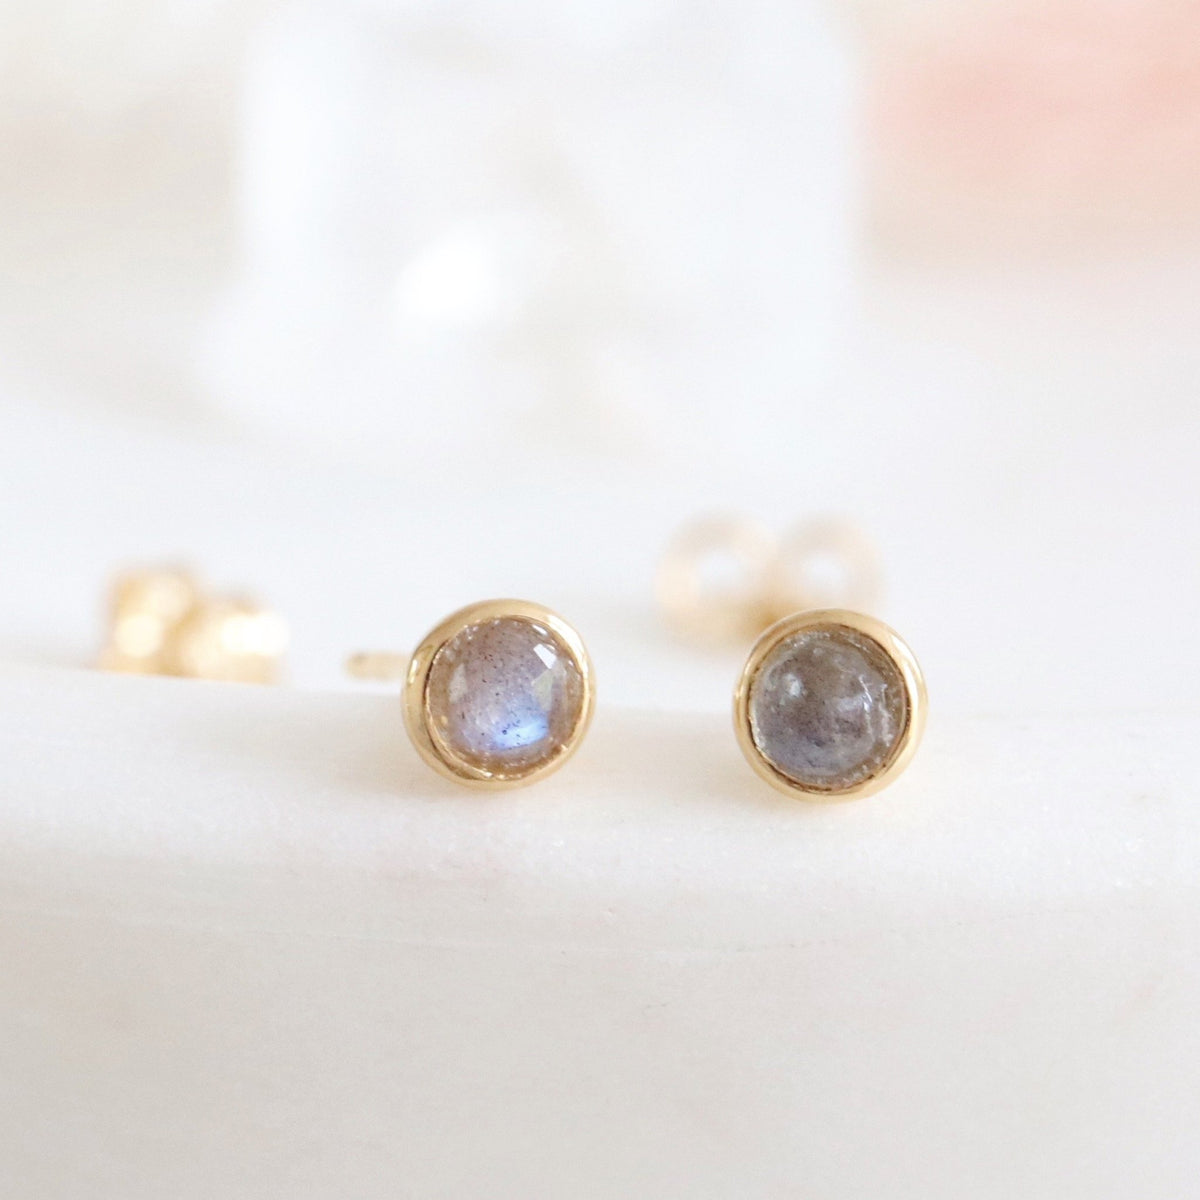 TINY PROTECT STUD EARRINGS - LABRADORITE &amp; GOLD - SO PRETTY CARA COTTER